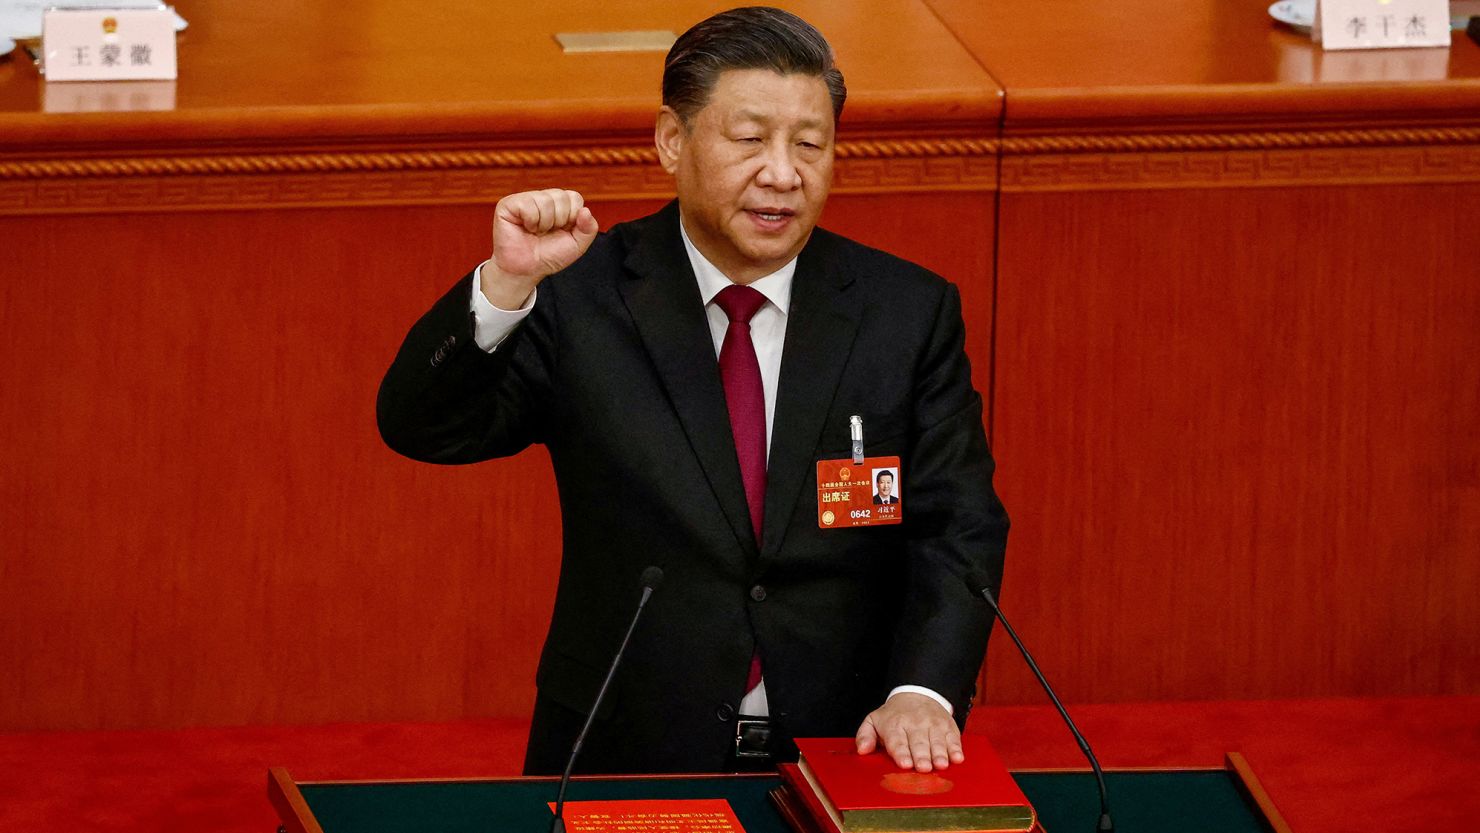 Chinese leader Xi Jinping takes his oath while securing a historic third term as president, during a ceremonial vote in Beijing's Great Hall of the People on Friday.